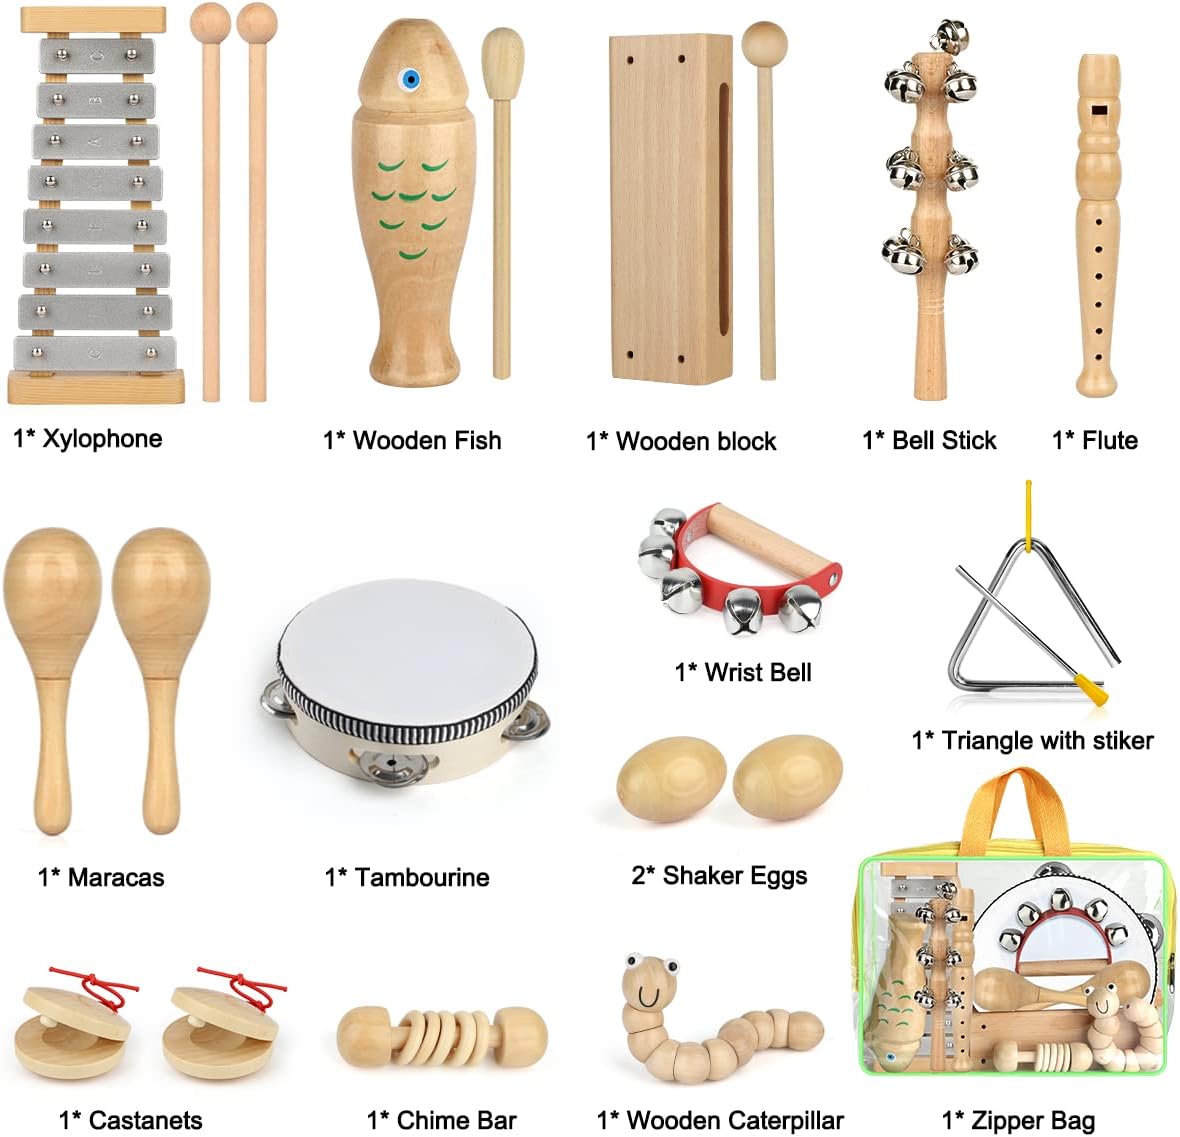 Kids Musical Instruments,100% Natural Wooden Music Percussion Toy Sets, 23 Pcs Tambourine Xylophone Toys for Kids, Girls Boys Preschool Education Early Learning Musical Toys with Bags : Toys Games